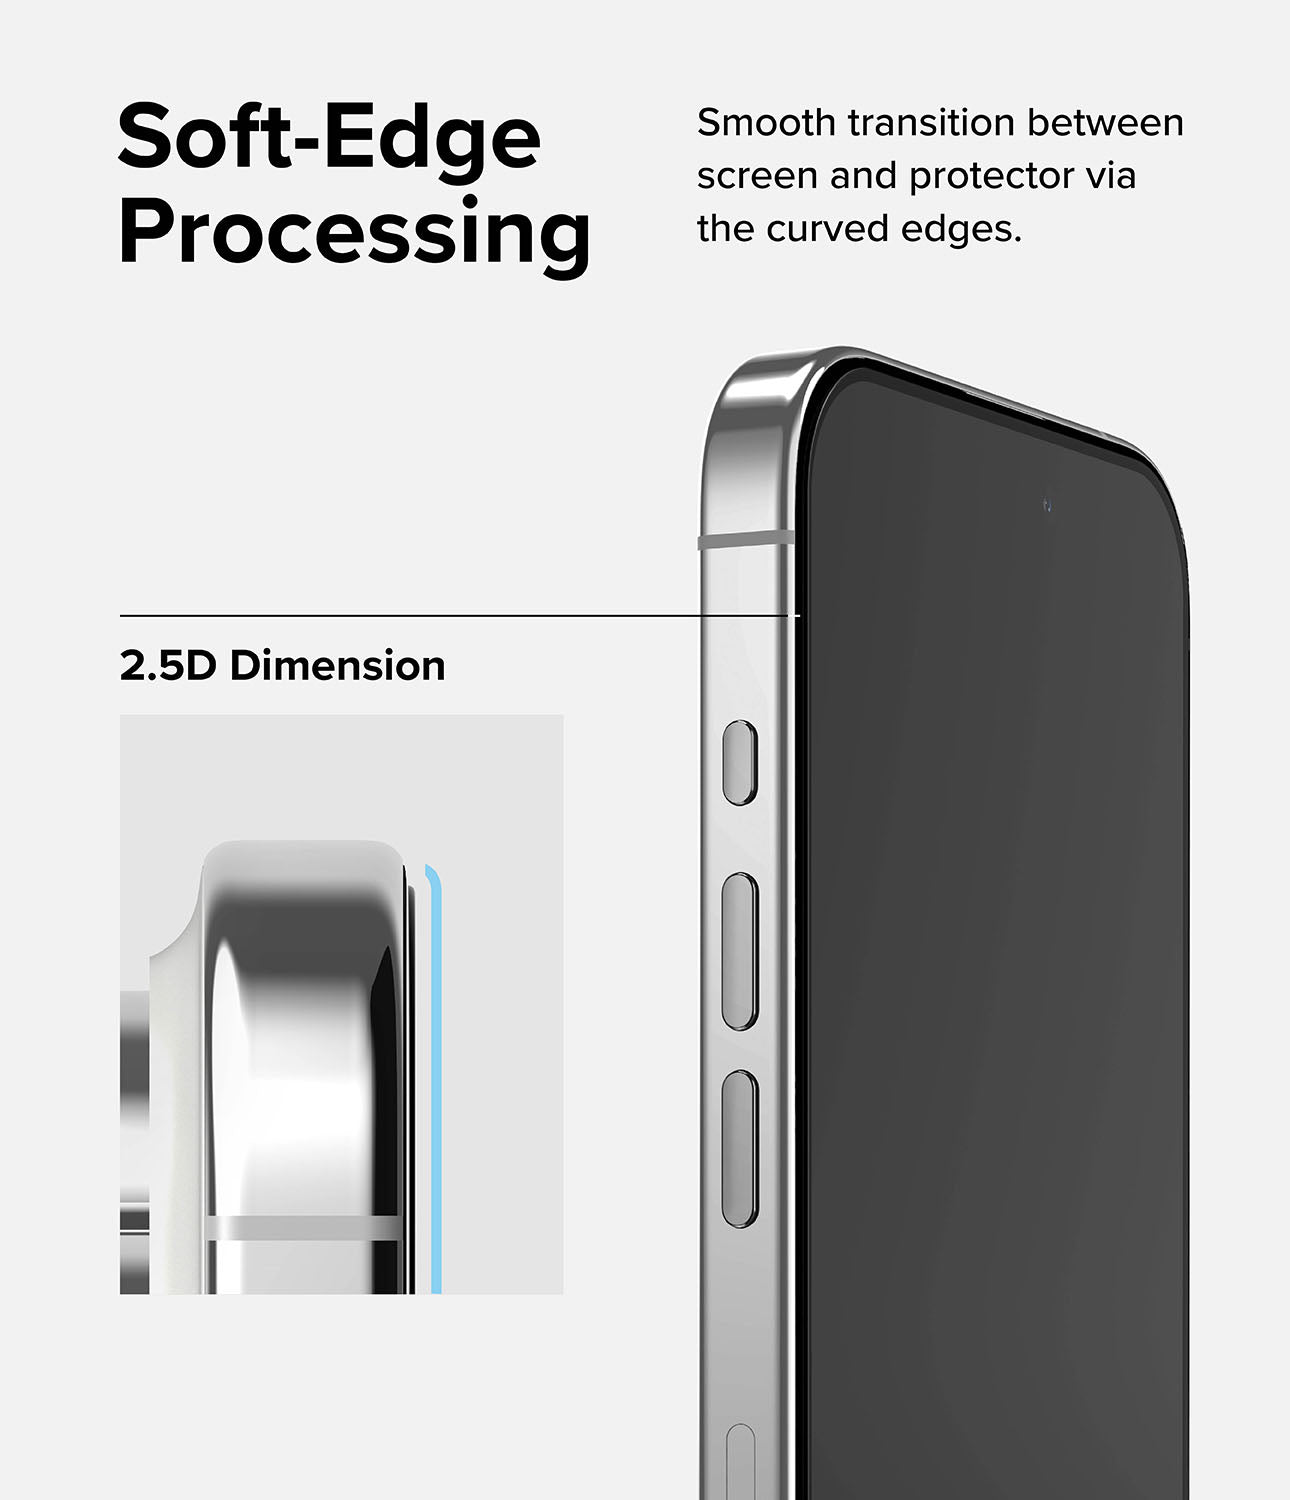 iPhone 15 Pro Max Screen Protector | Full Cover Glass - Soft-Edge Processing. Smooth transition between screen and protector via the curved edges.